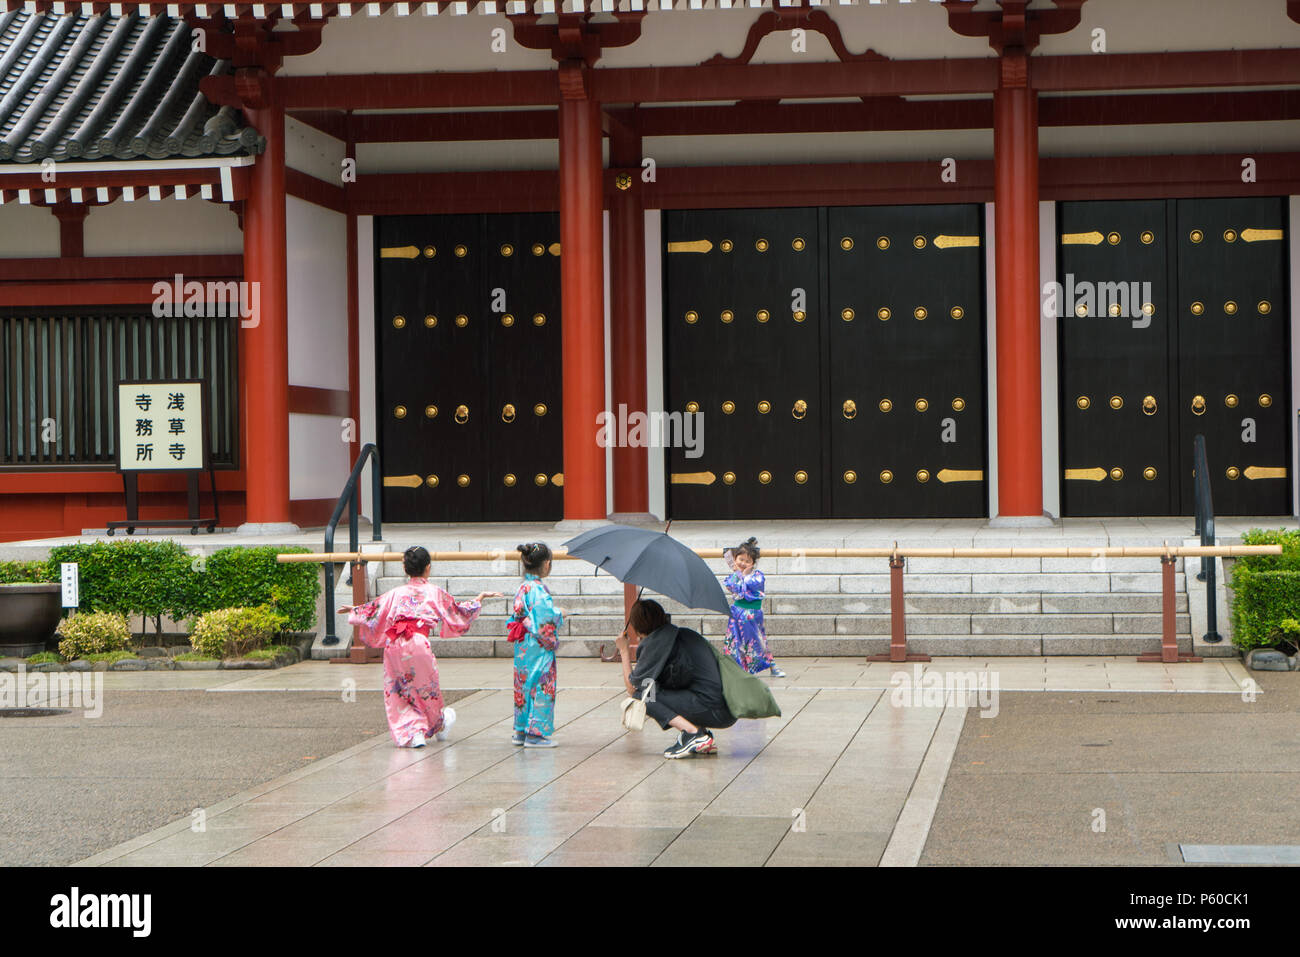 TOKYO, JAPAN - 23/5/2018: Traditionally dressed children posing for photography in front of old historic building in Asakusa, Tokyo. Stock Photo